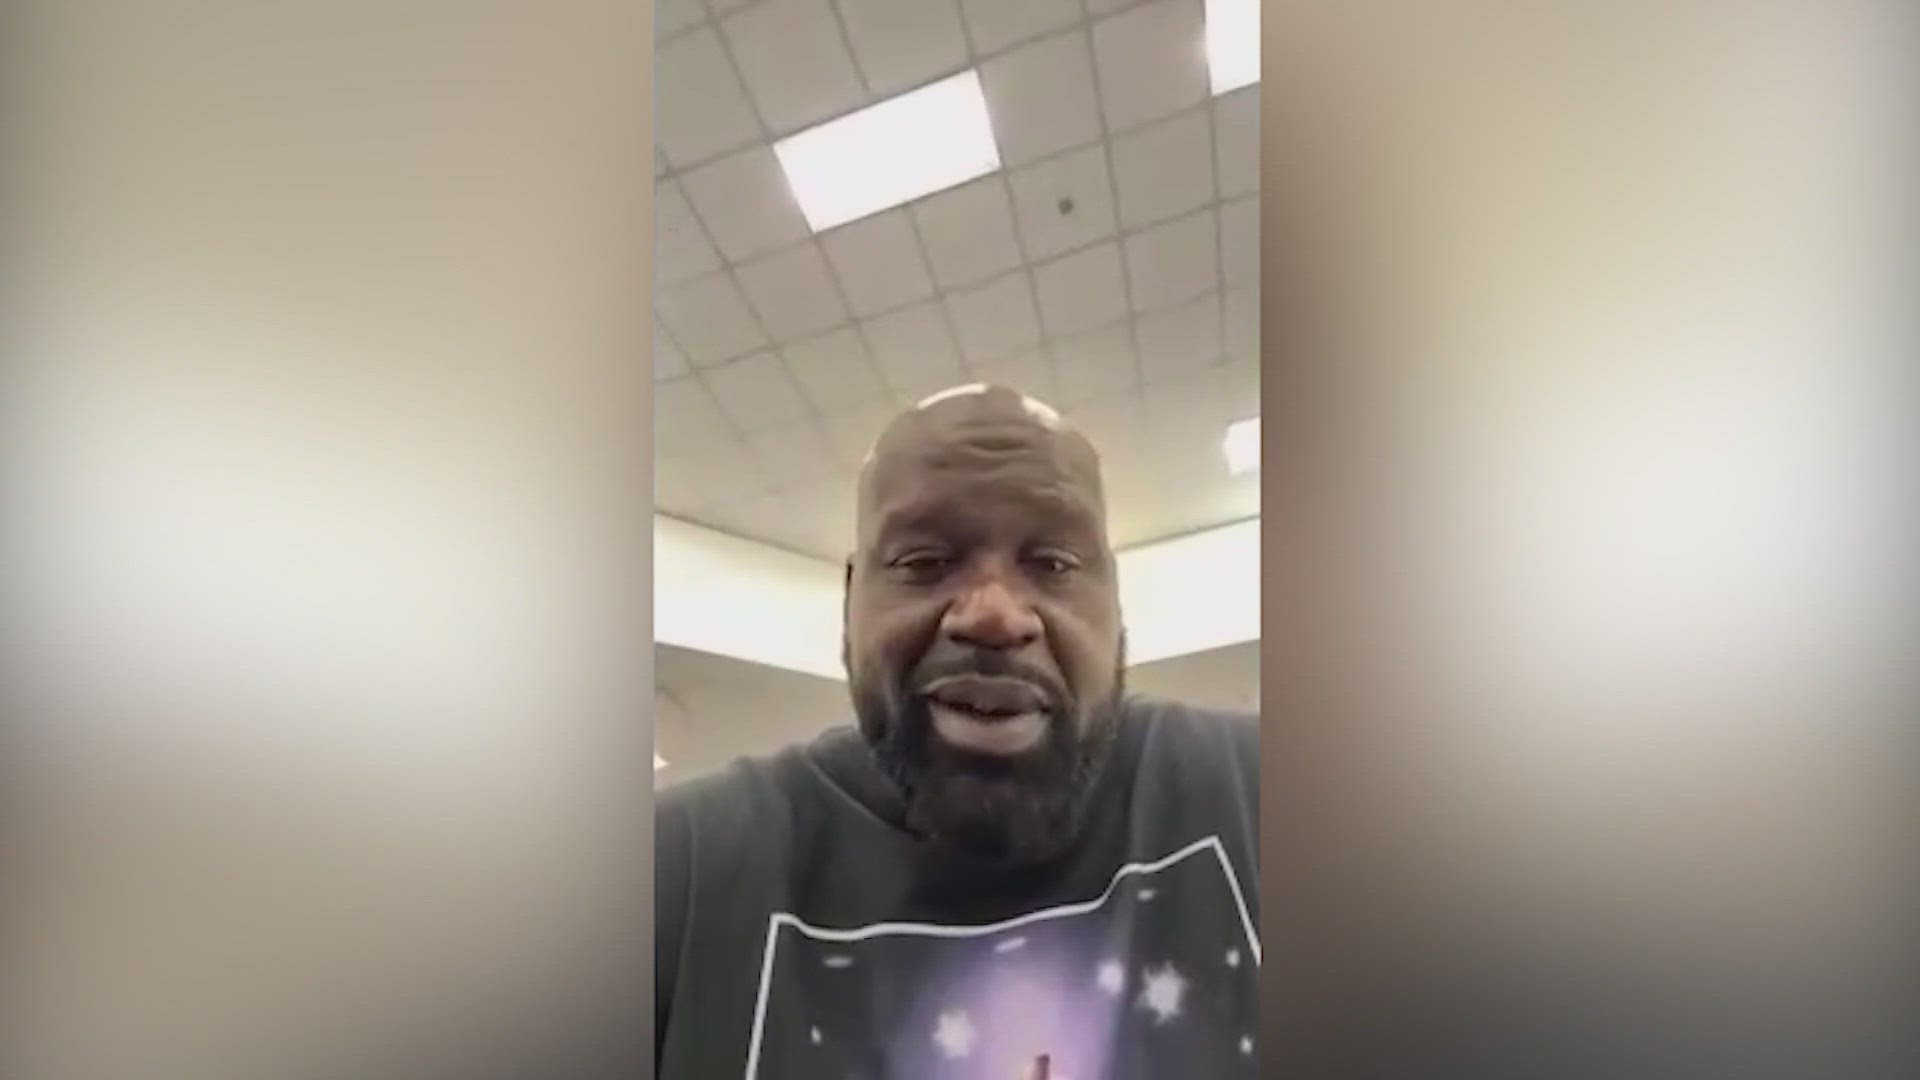 Shaq's had many side quests since his NBA player days, including a move to North Texas last year. Here's a sneak peek of his interview with WFAA Daybreak.